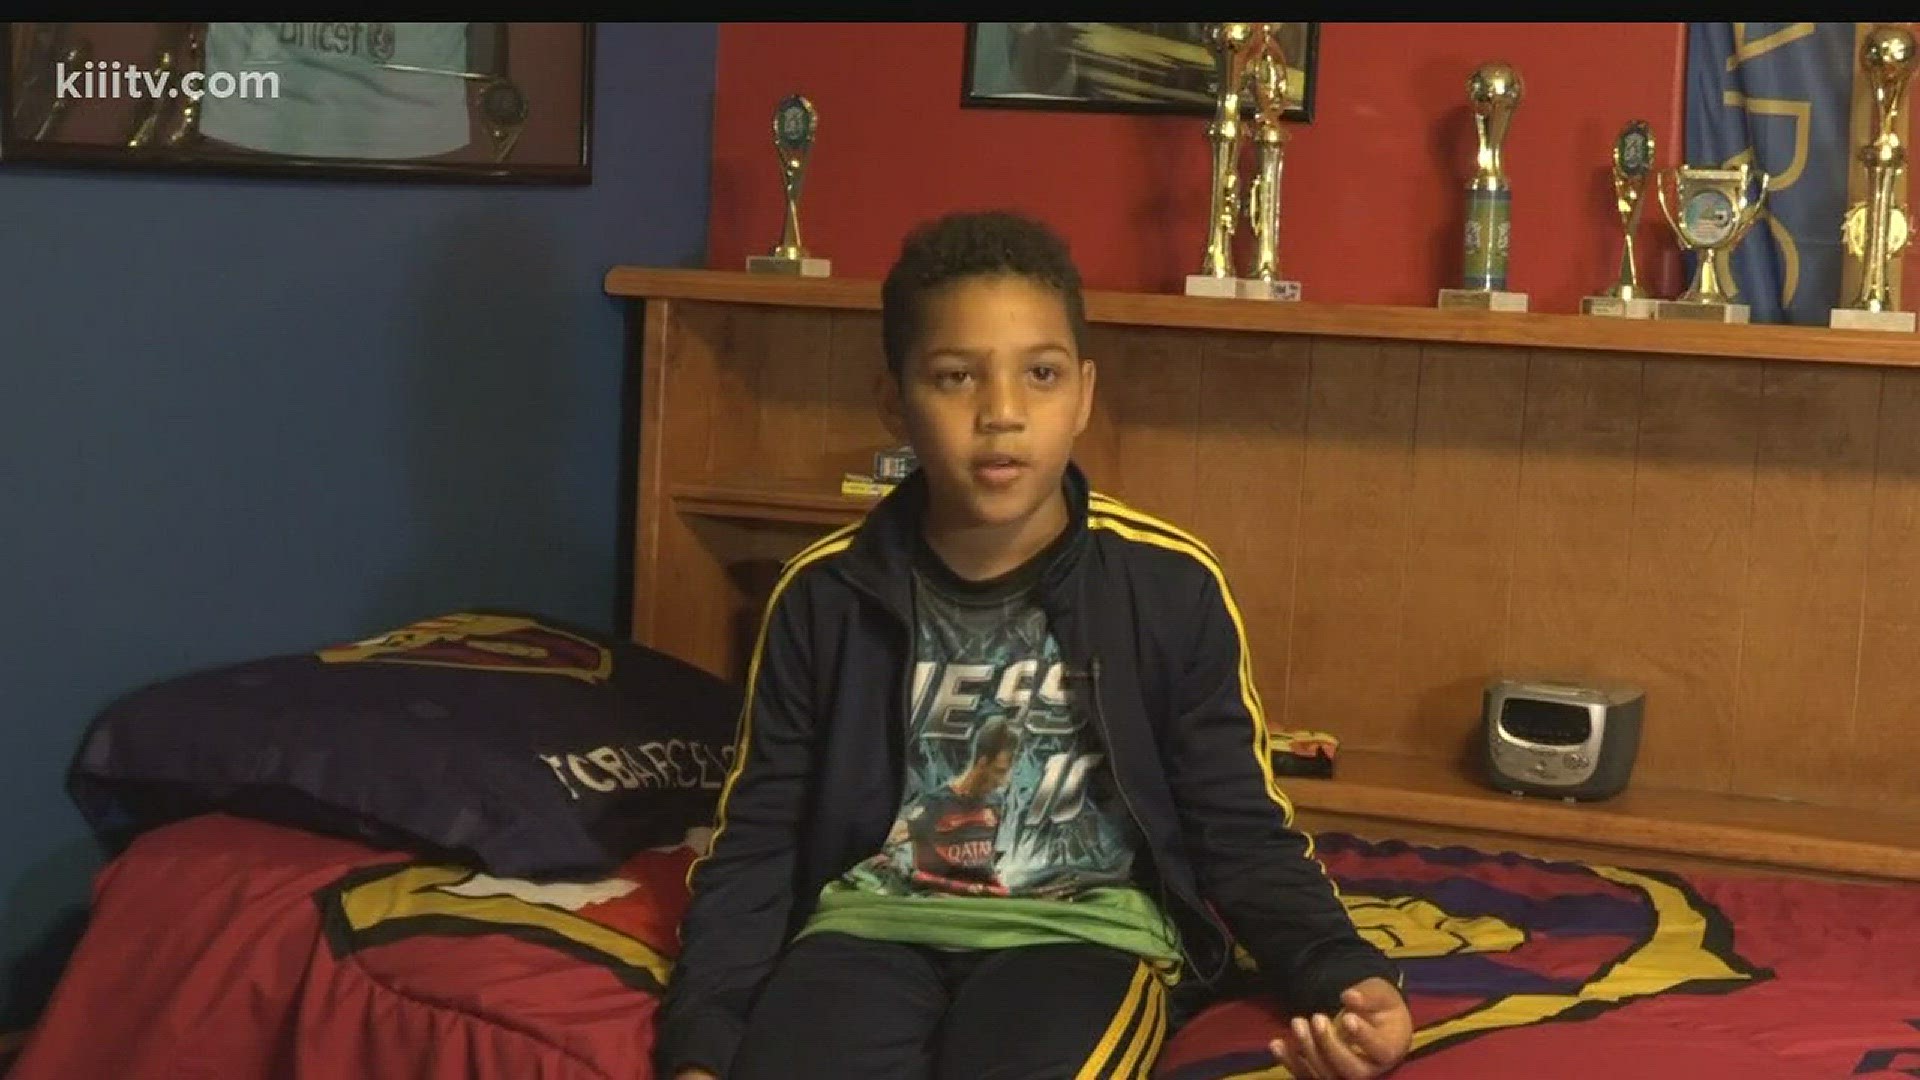 7-year-old Jaron Couture was selected out of thousands of soccer players to attend a camp with FC Barcelona in Spain but needs help getting there.